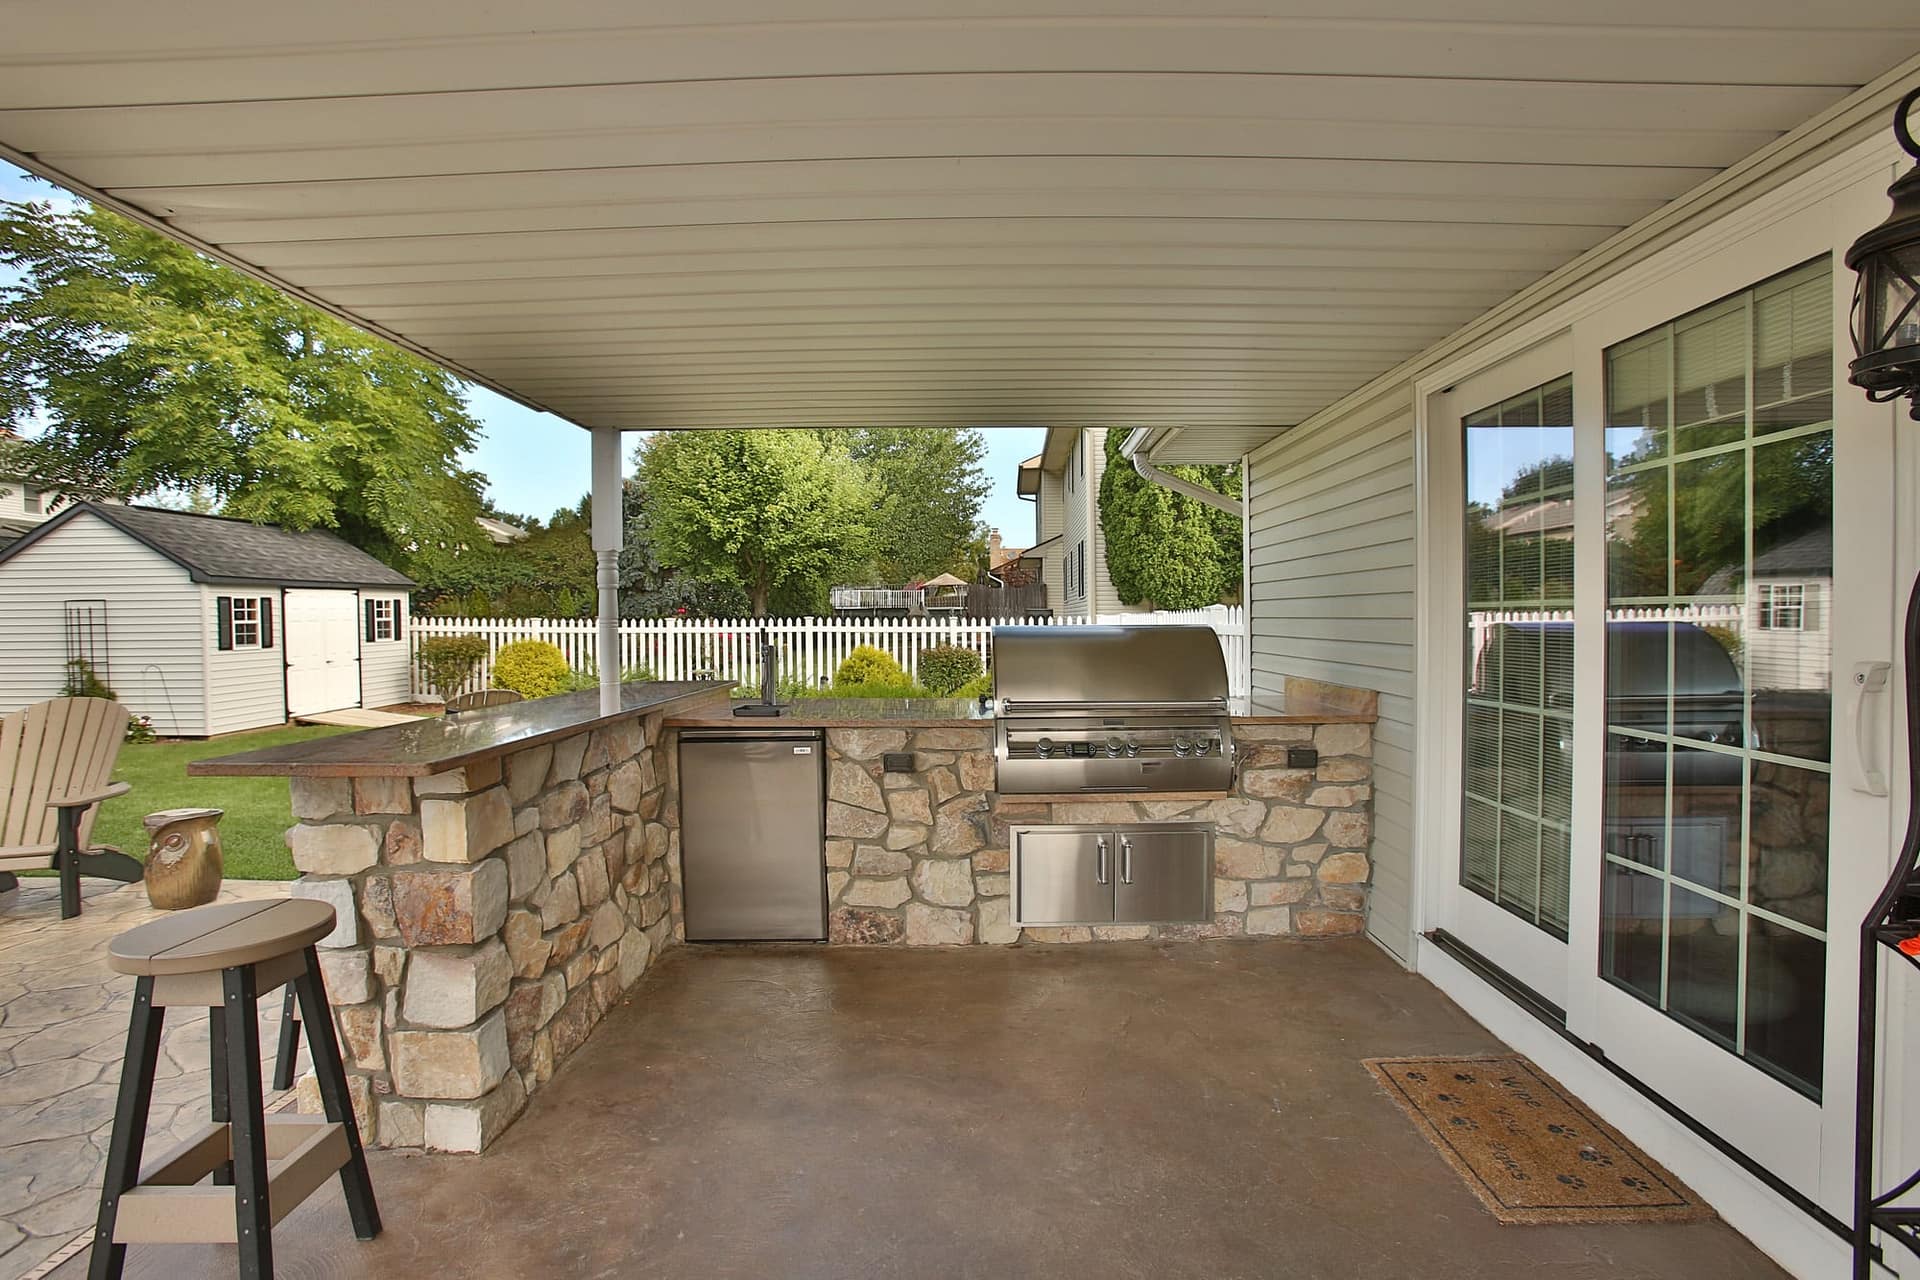 Planning for an Outdoor Kitchen